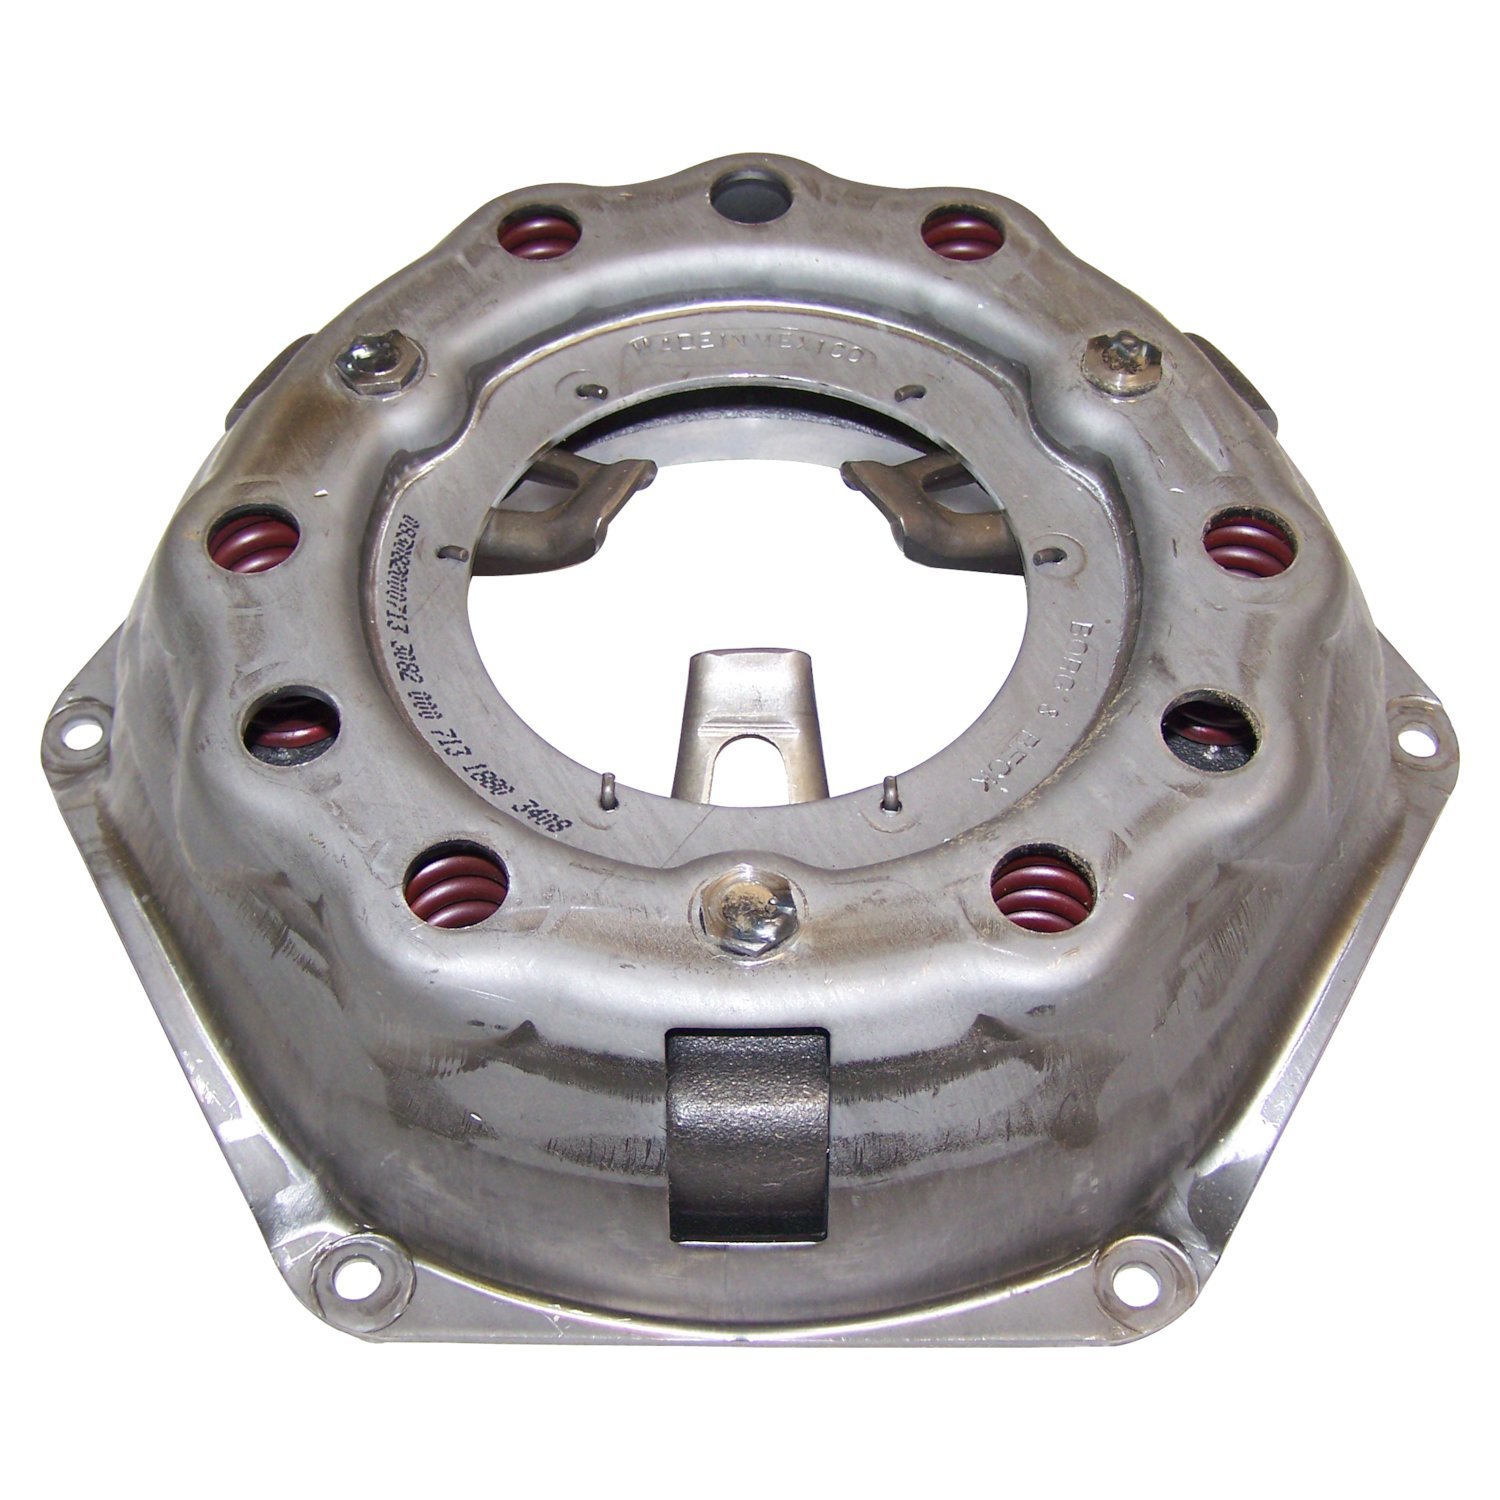 9?" Clutch Pressure Plate for 1960-71 Misc. Jeep Models w/ 4-134 or 6-230 Engs.